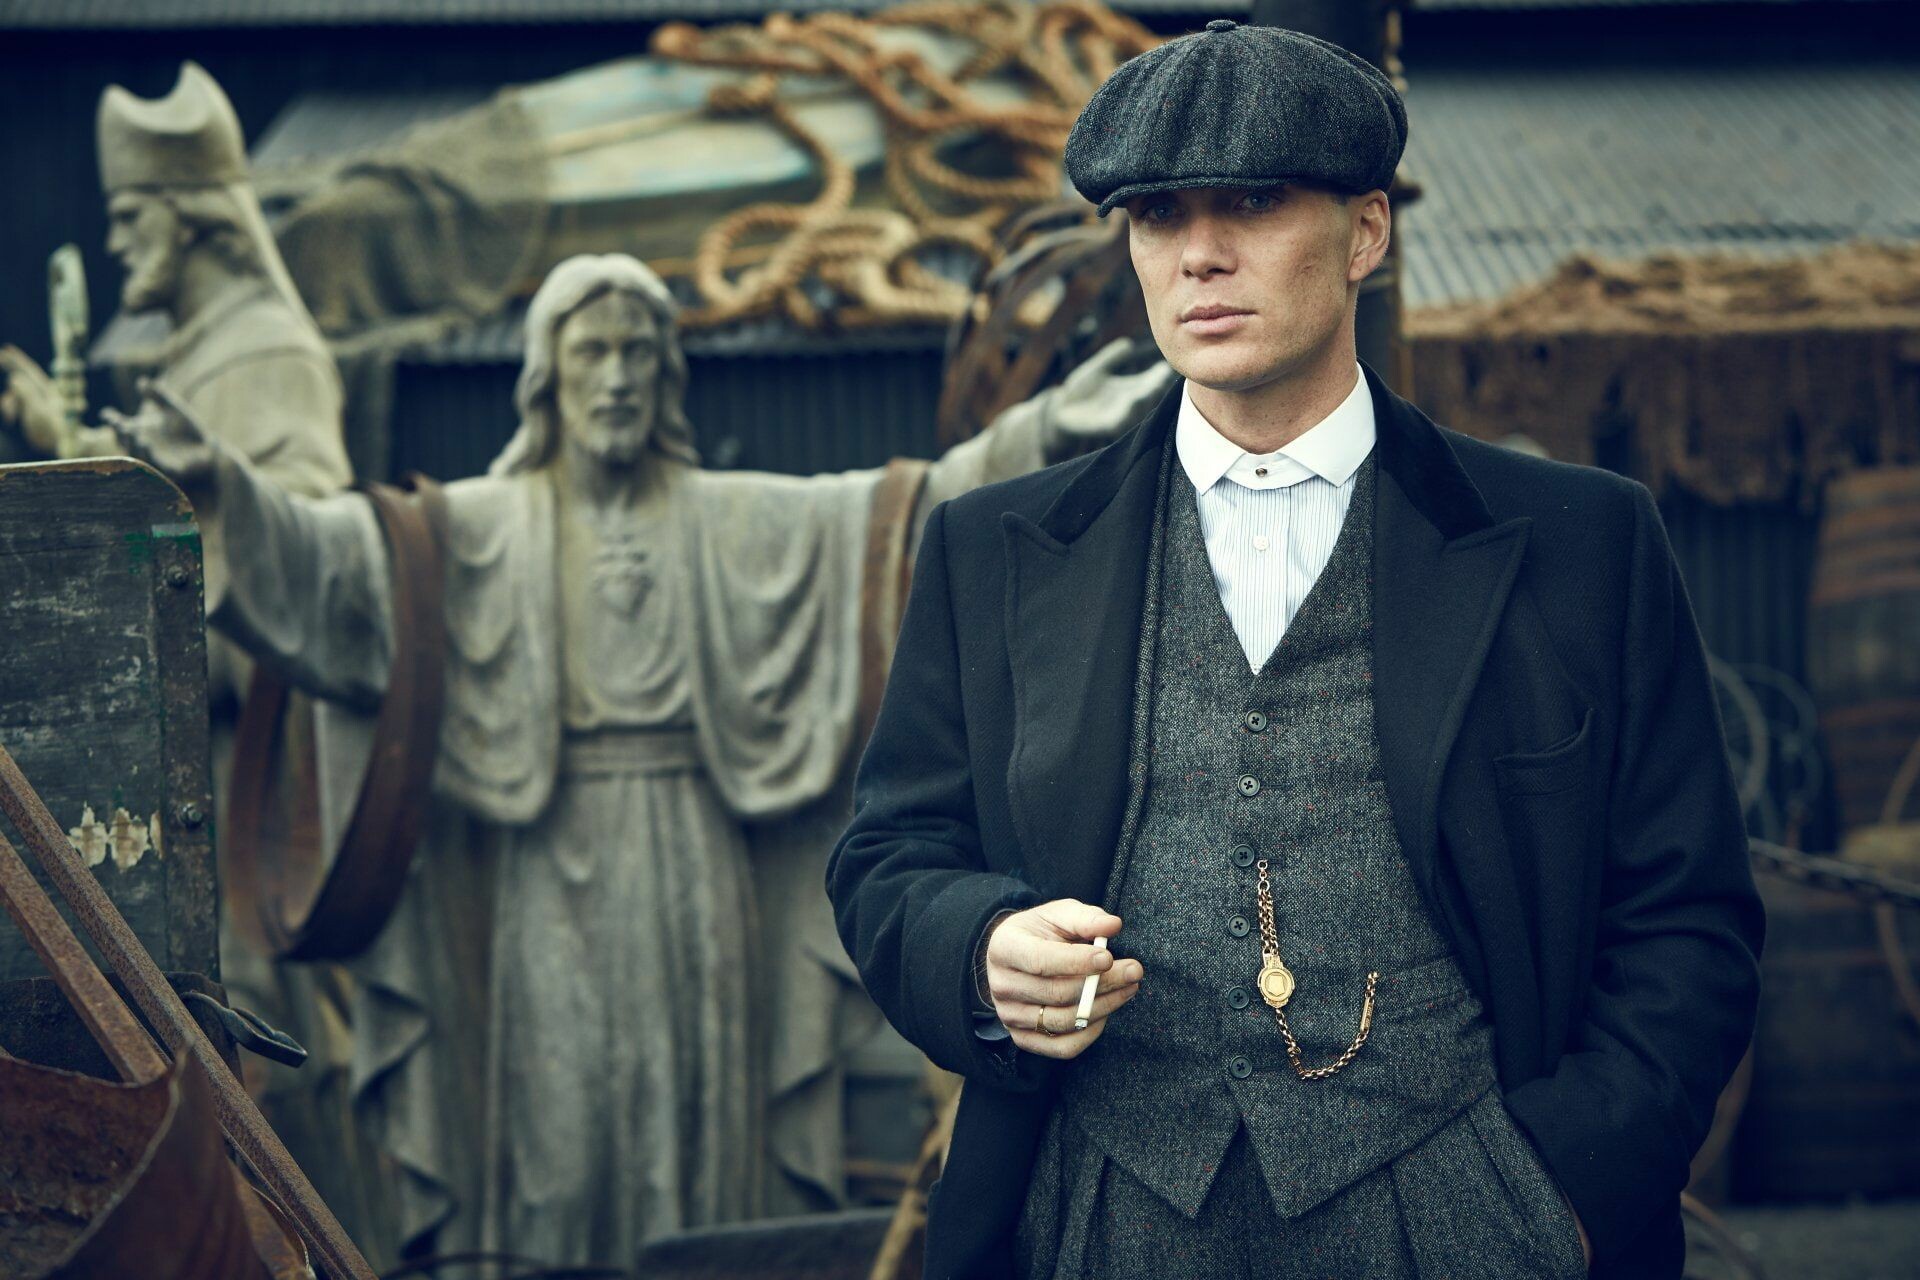 Peaky Blinders: A war veteran who fought in the trenches, Tommy Shelby. 1920x1280 HD Wallpaper.